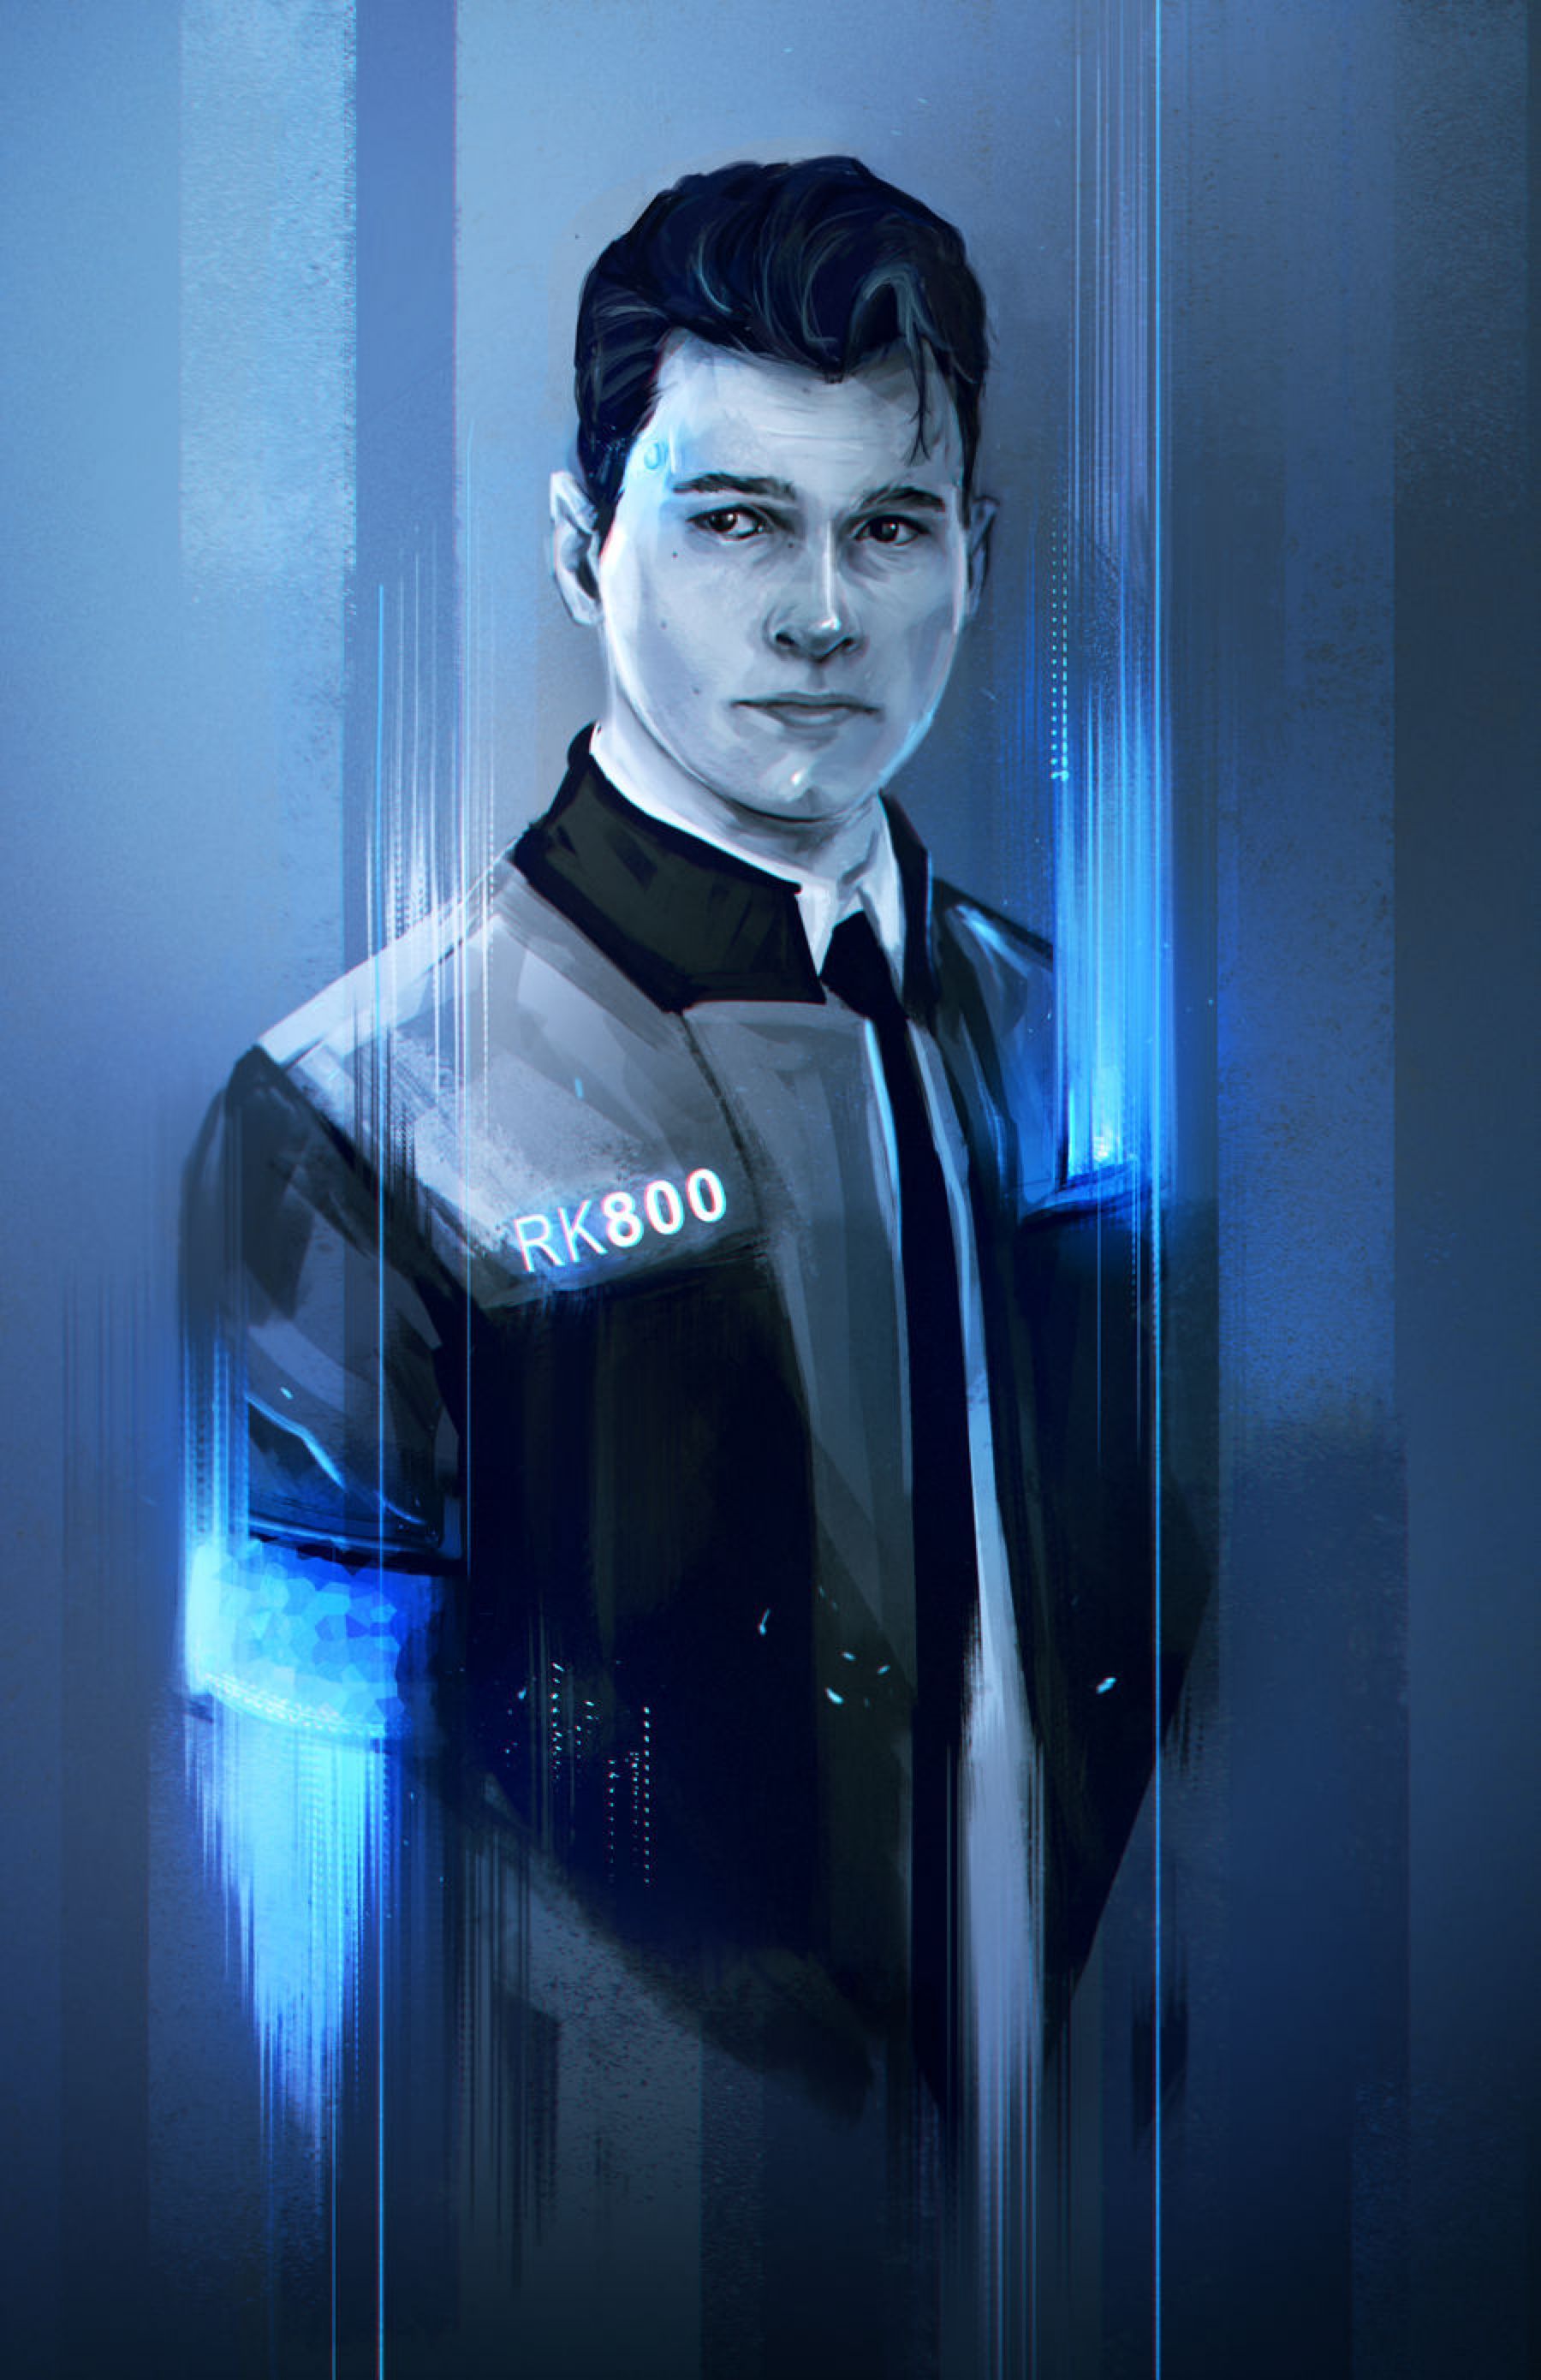 Connor Become Human